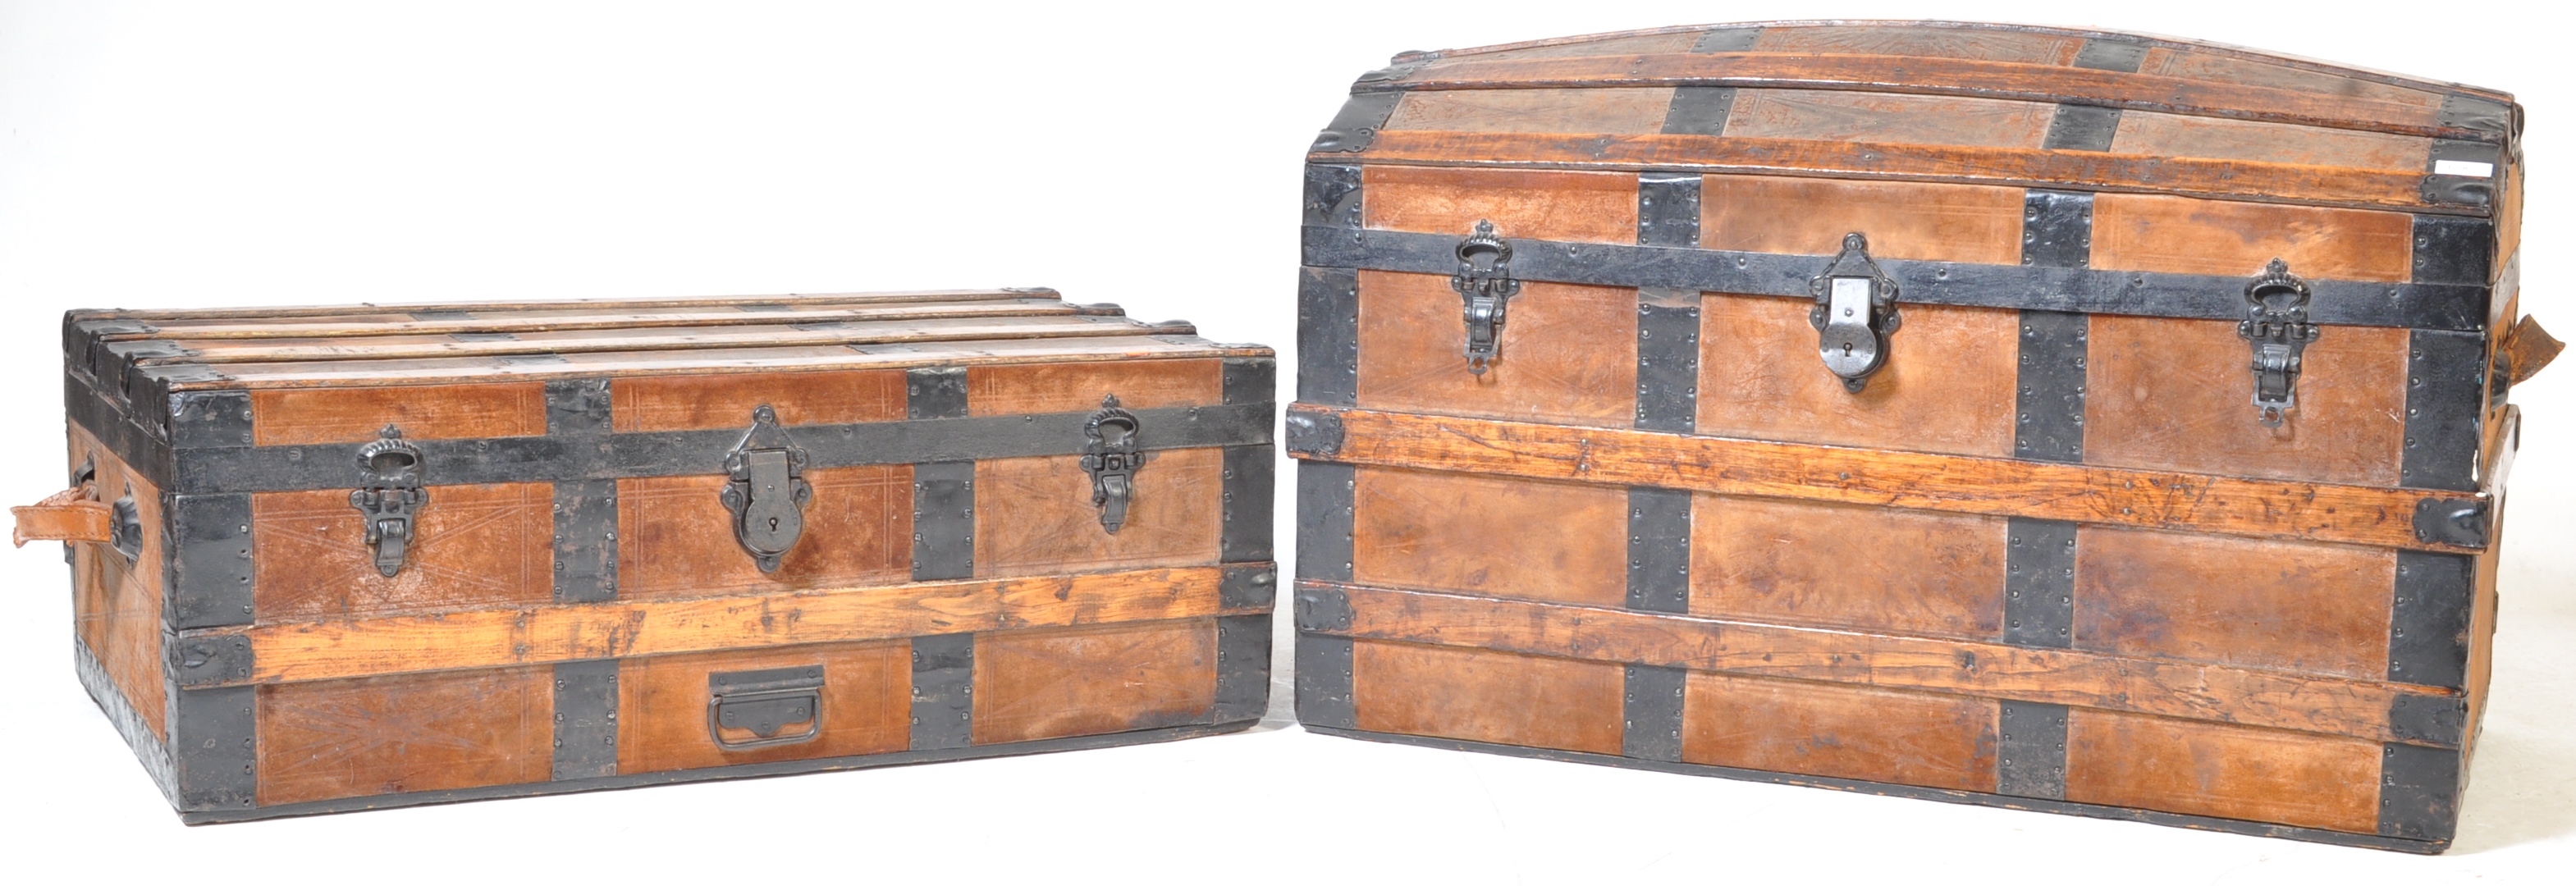 TWO EARLY 20TH CENTURY WOODEN TRUNKS / SHIPPING TRUNKS